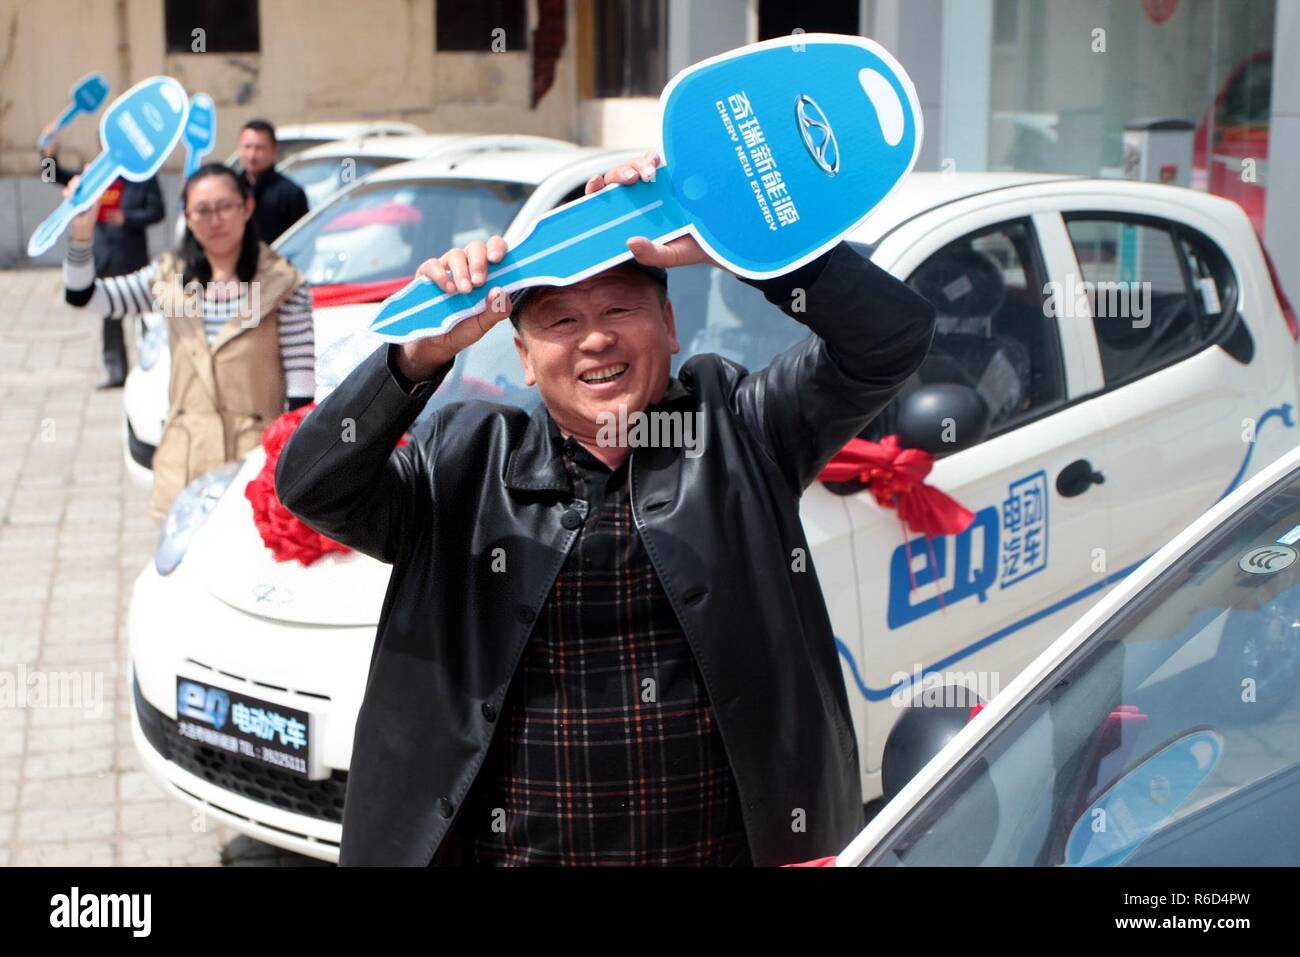 (181205) -- BEIJING, Dec. 5, 2018 (Xinhua) -- Owners of electric cars show their keys at a new energy vehicle display center in Dalian, northeast China's Liaoning Province, April 18, 2015. China has been delivering on its commitment to the international community on climate change by continuously shifting to a more green economy over the past years. New energy-rich regions like Inner Mongolia and Ningxia are sending more electricity generated from clean energy to the country's bustling east to help reduce the country's heavy reliance on coal in the fight against pollution and coping wi Stock Photo